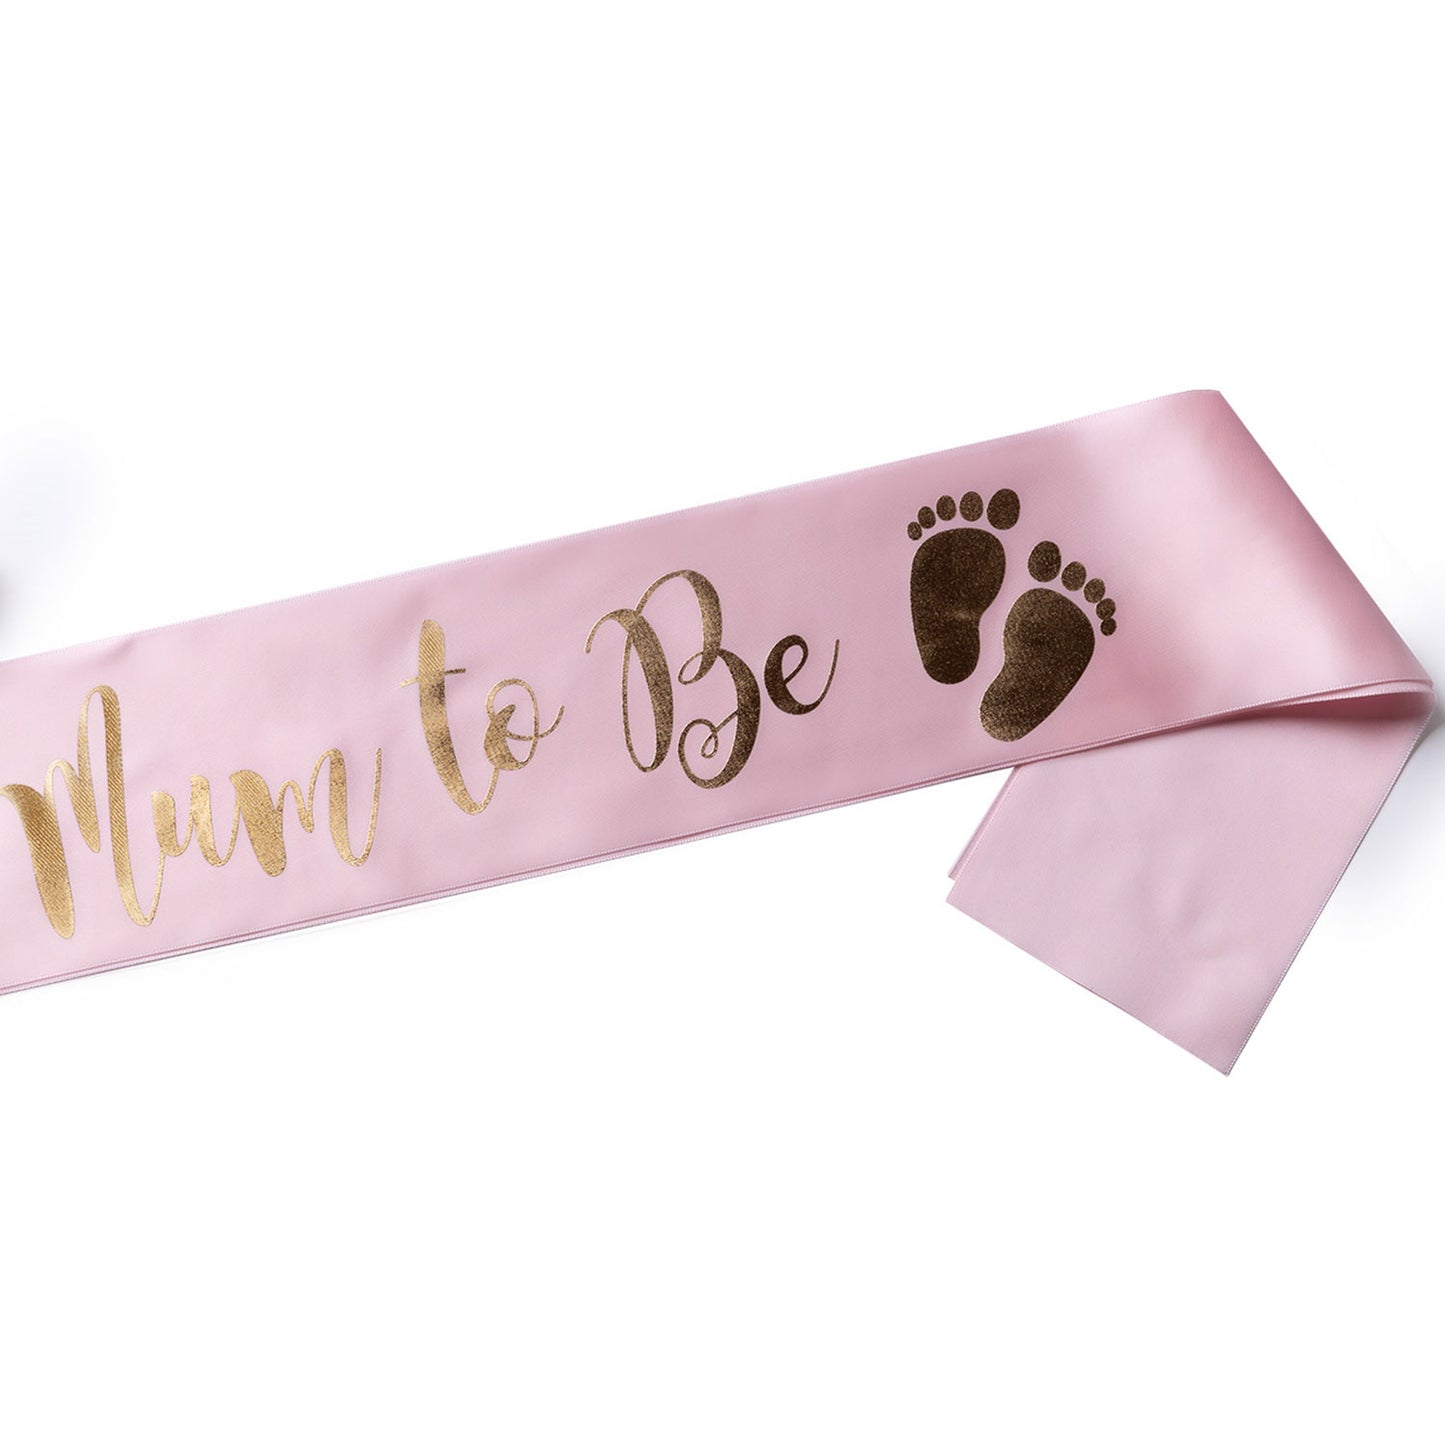 Echarpe Mum to Be pour Babyshower - Rose et Or